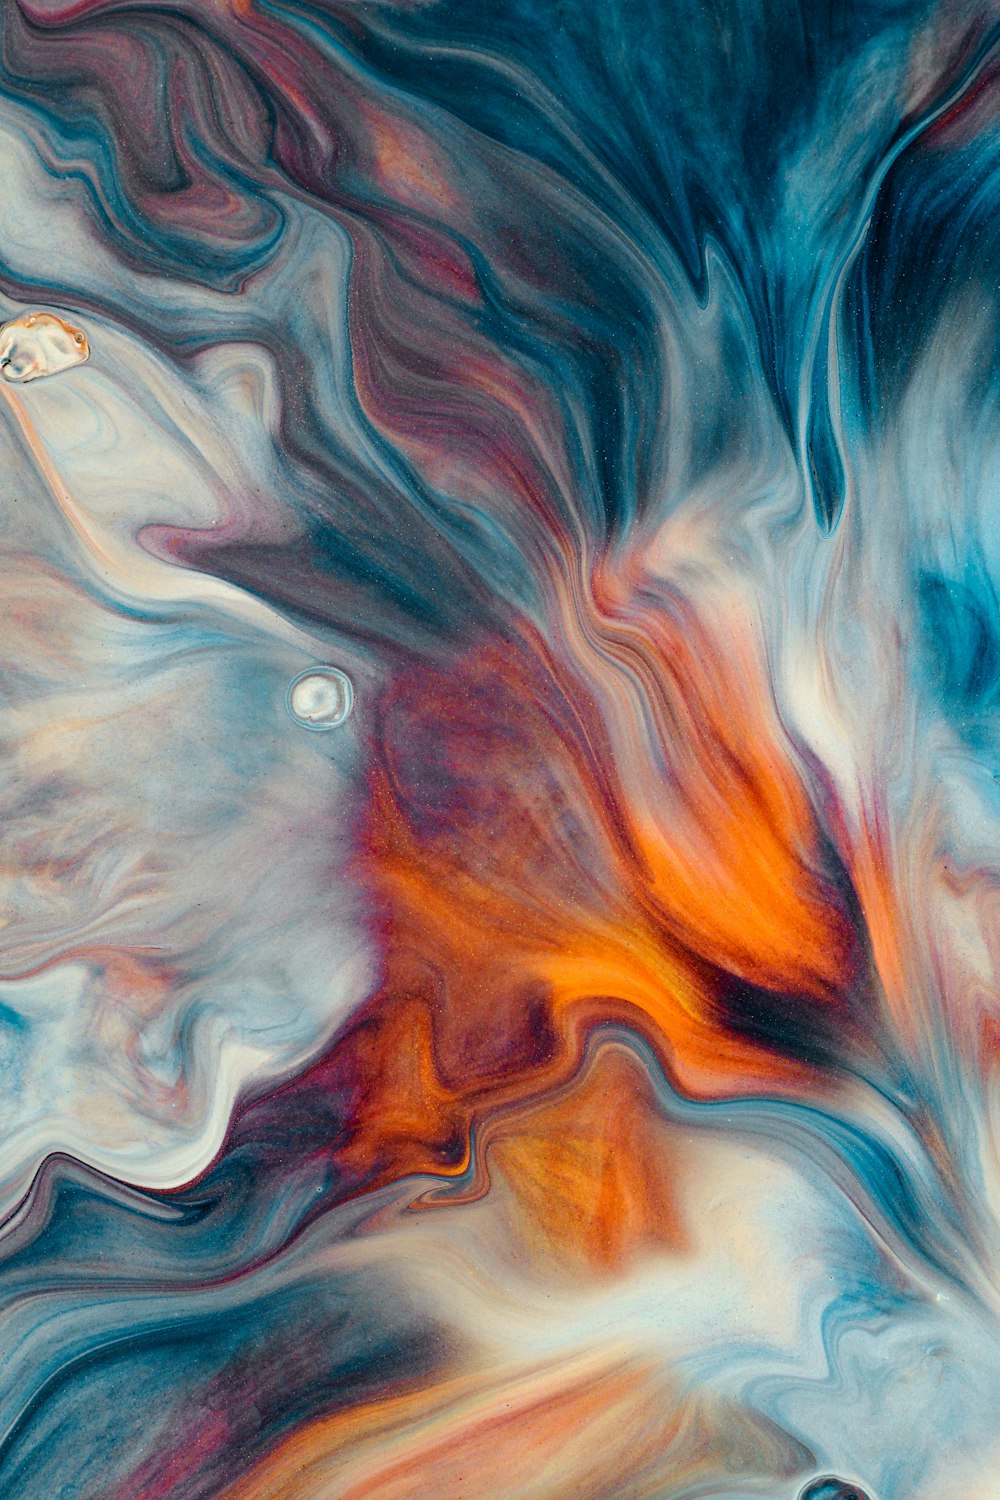 an abstract painting with blue, orange, and white colors